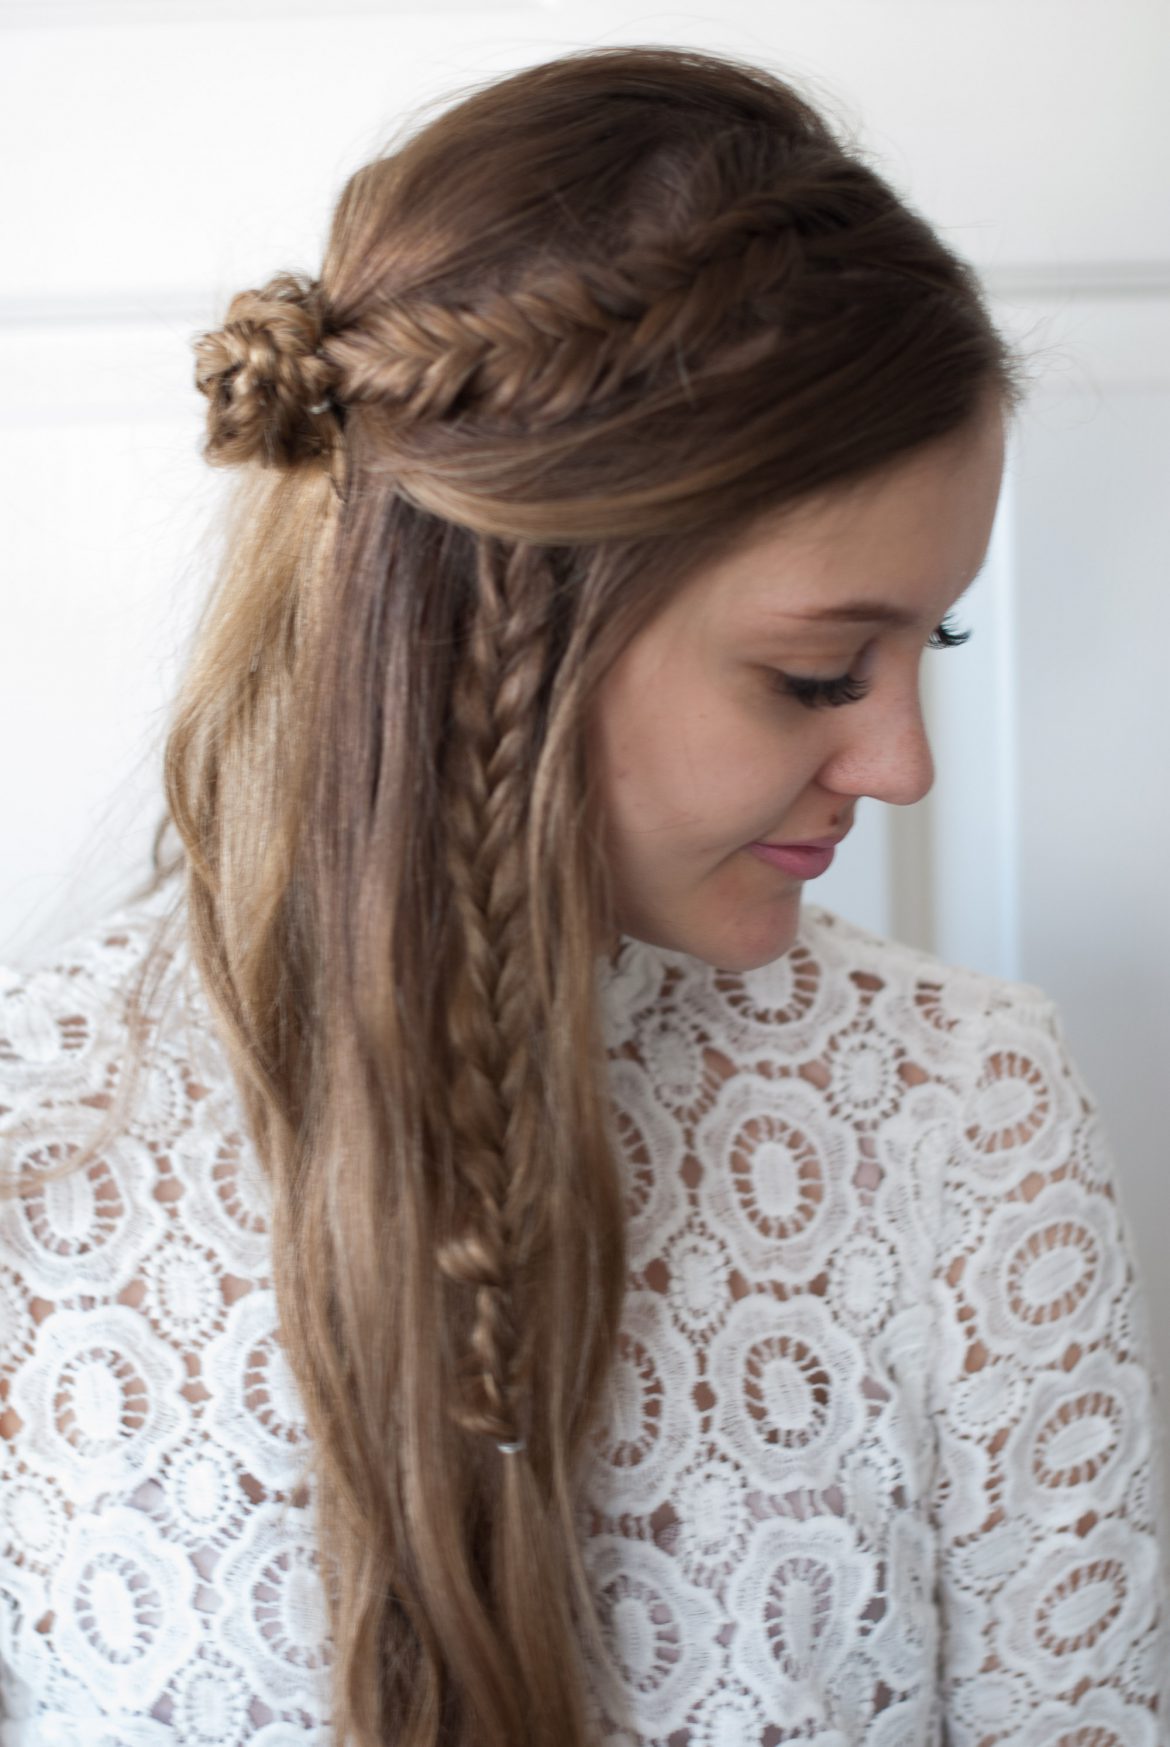 Quick Side Braids You Need to Try